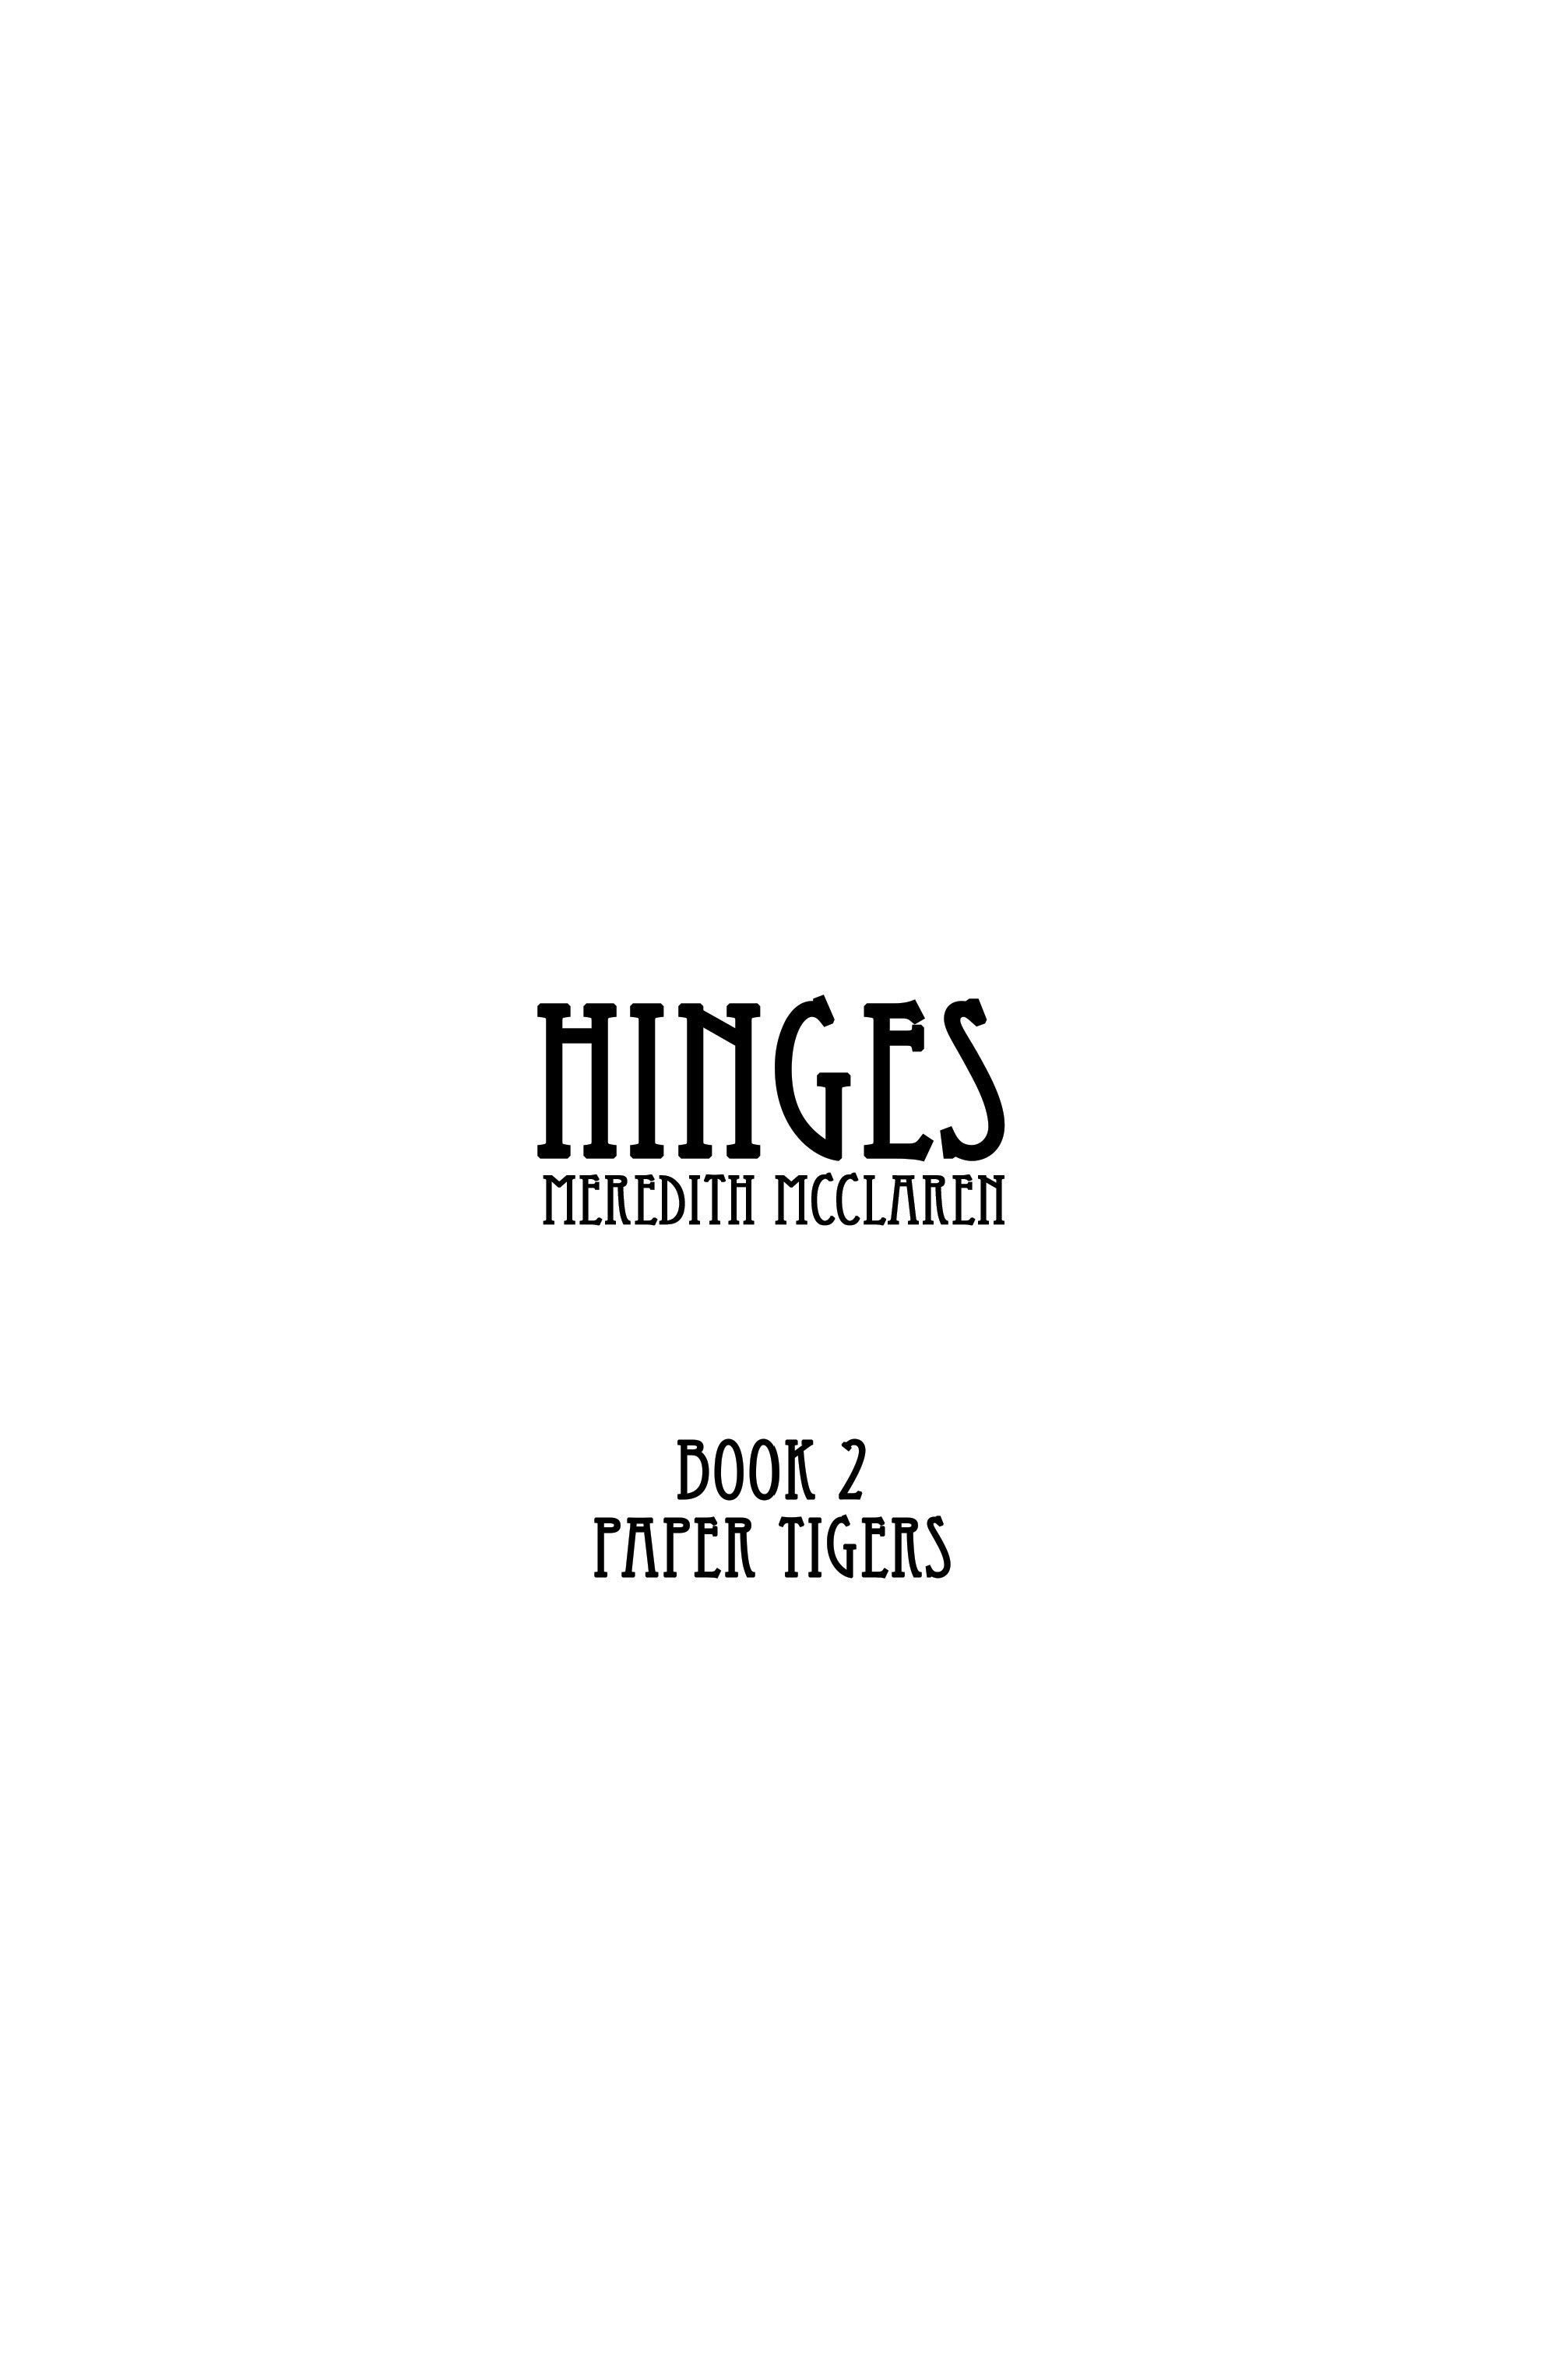 Read online Hinges: Paper Tigers comic -  Issue # TPB - 2